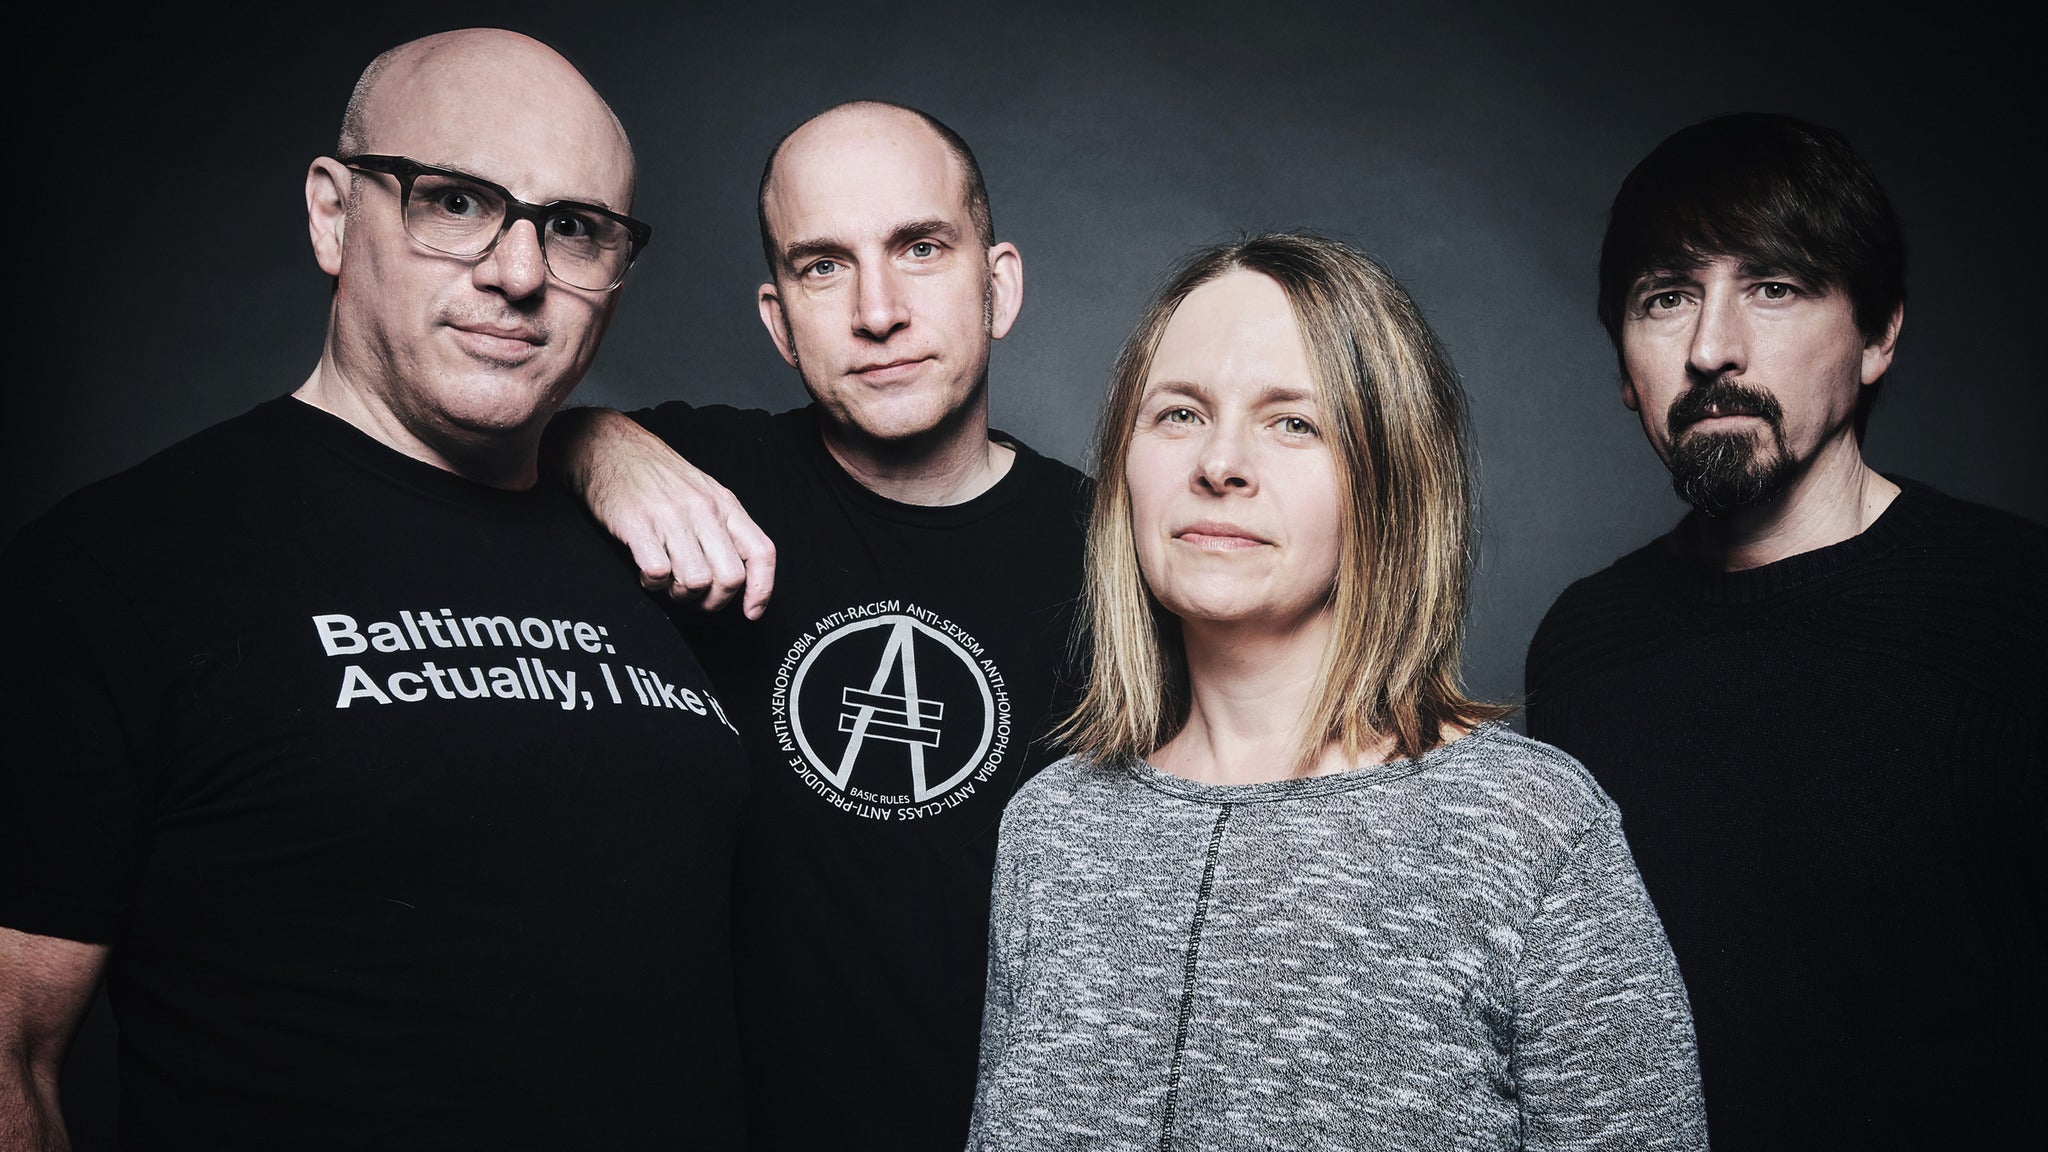 Jawbox pre-sale code for early tickets in Denver